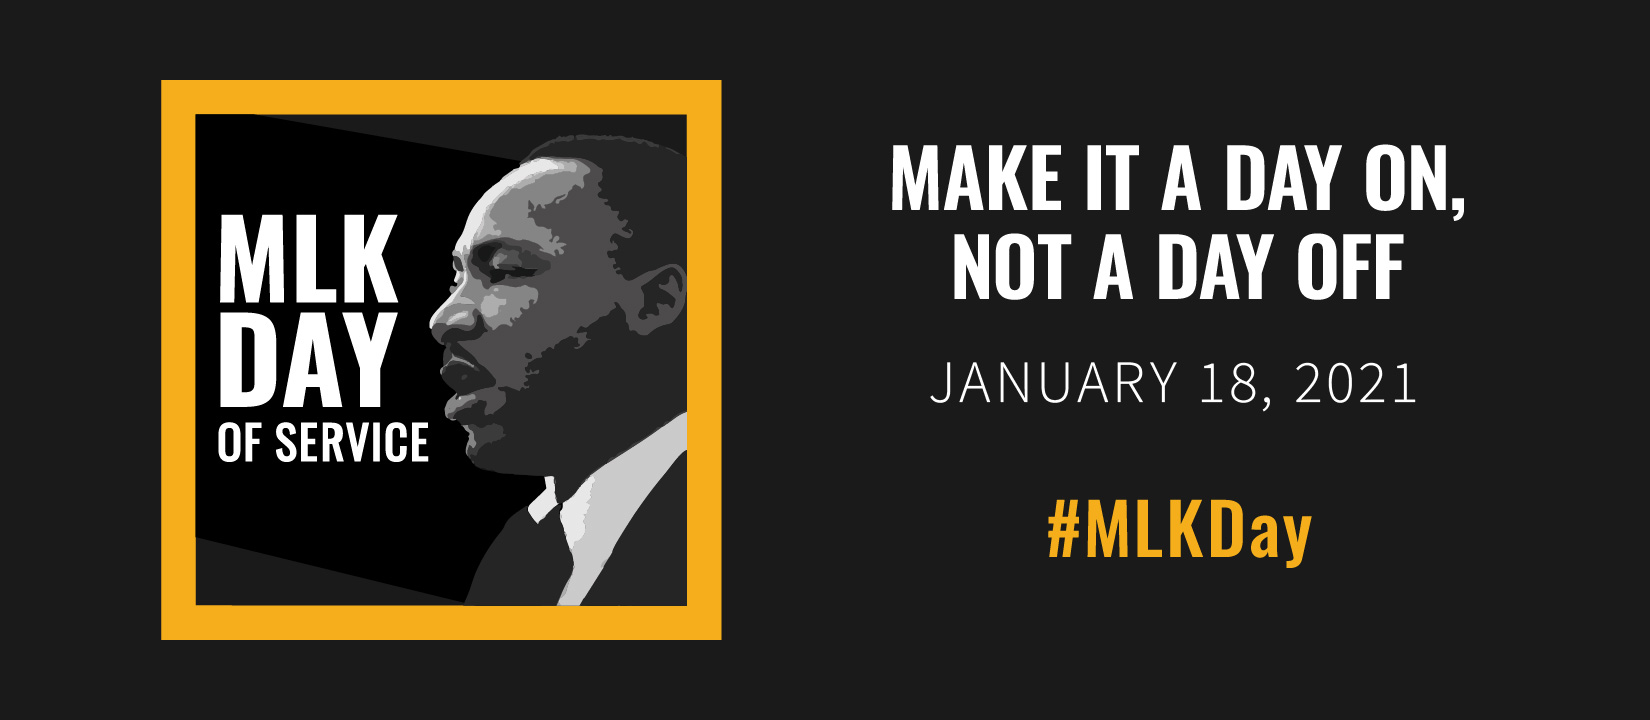 MLK - Day of Service - Make it a day on, not a day off. January 18, 2021 #MLKDay